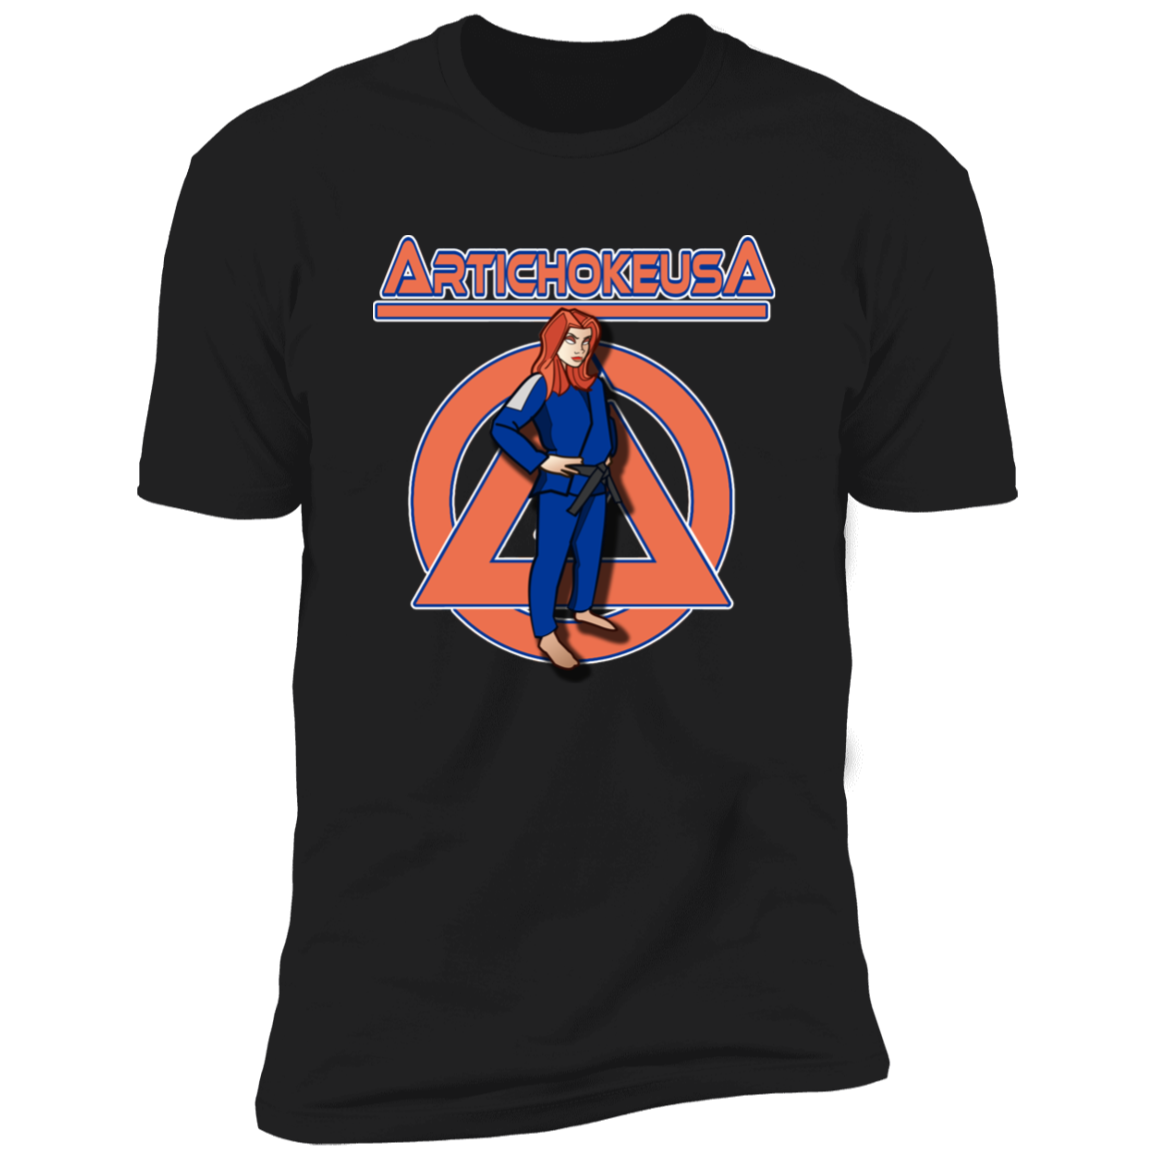 ArtichokeUSA Character and Font design. Let's Create Your Own Team Design Today. Amber. Men's Premium Short Sleeve T-Shirt